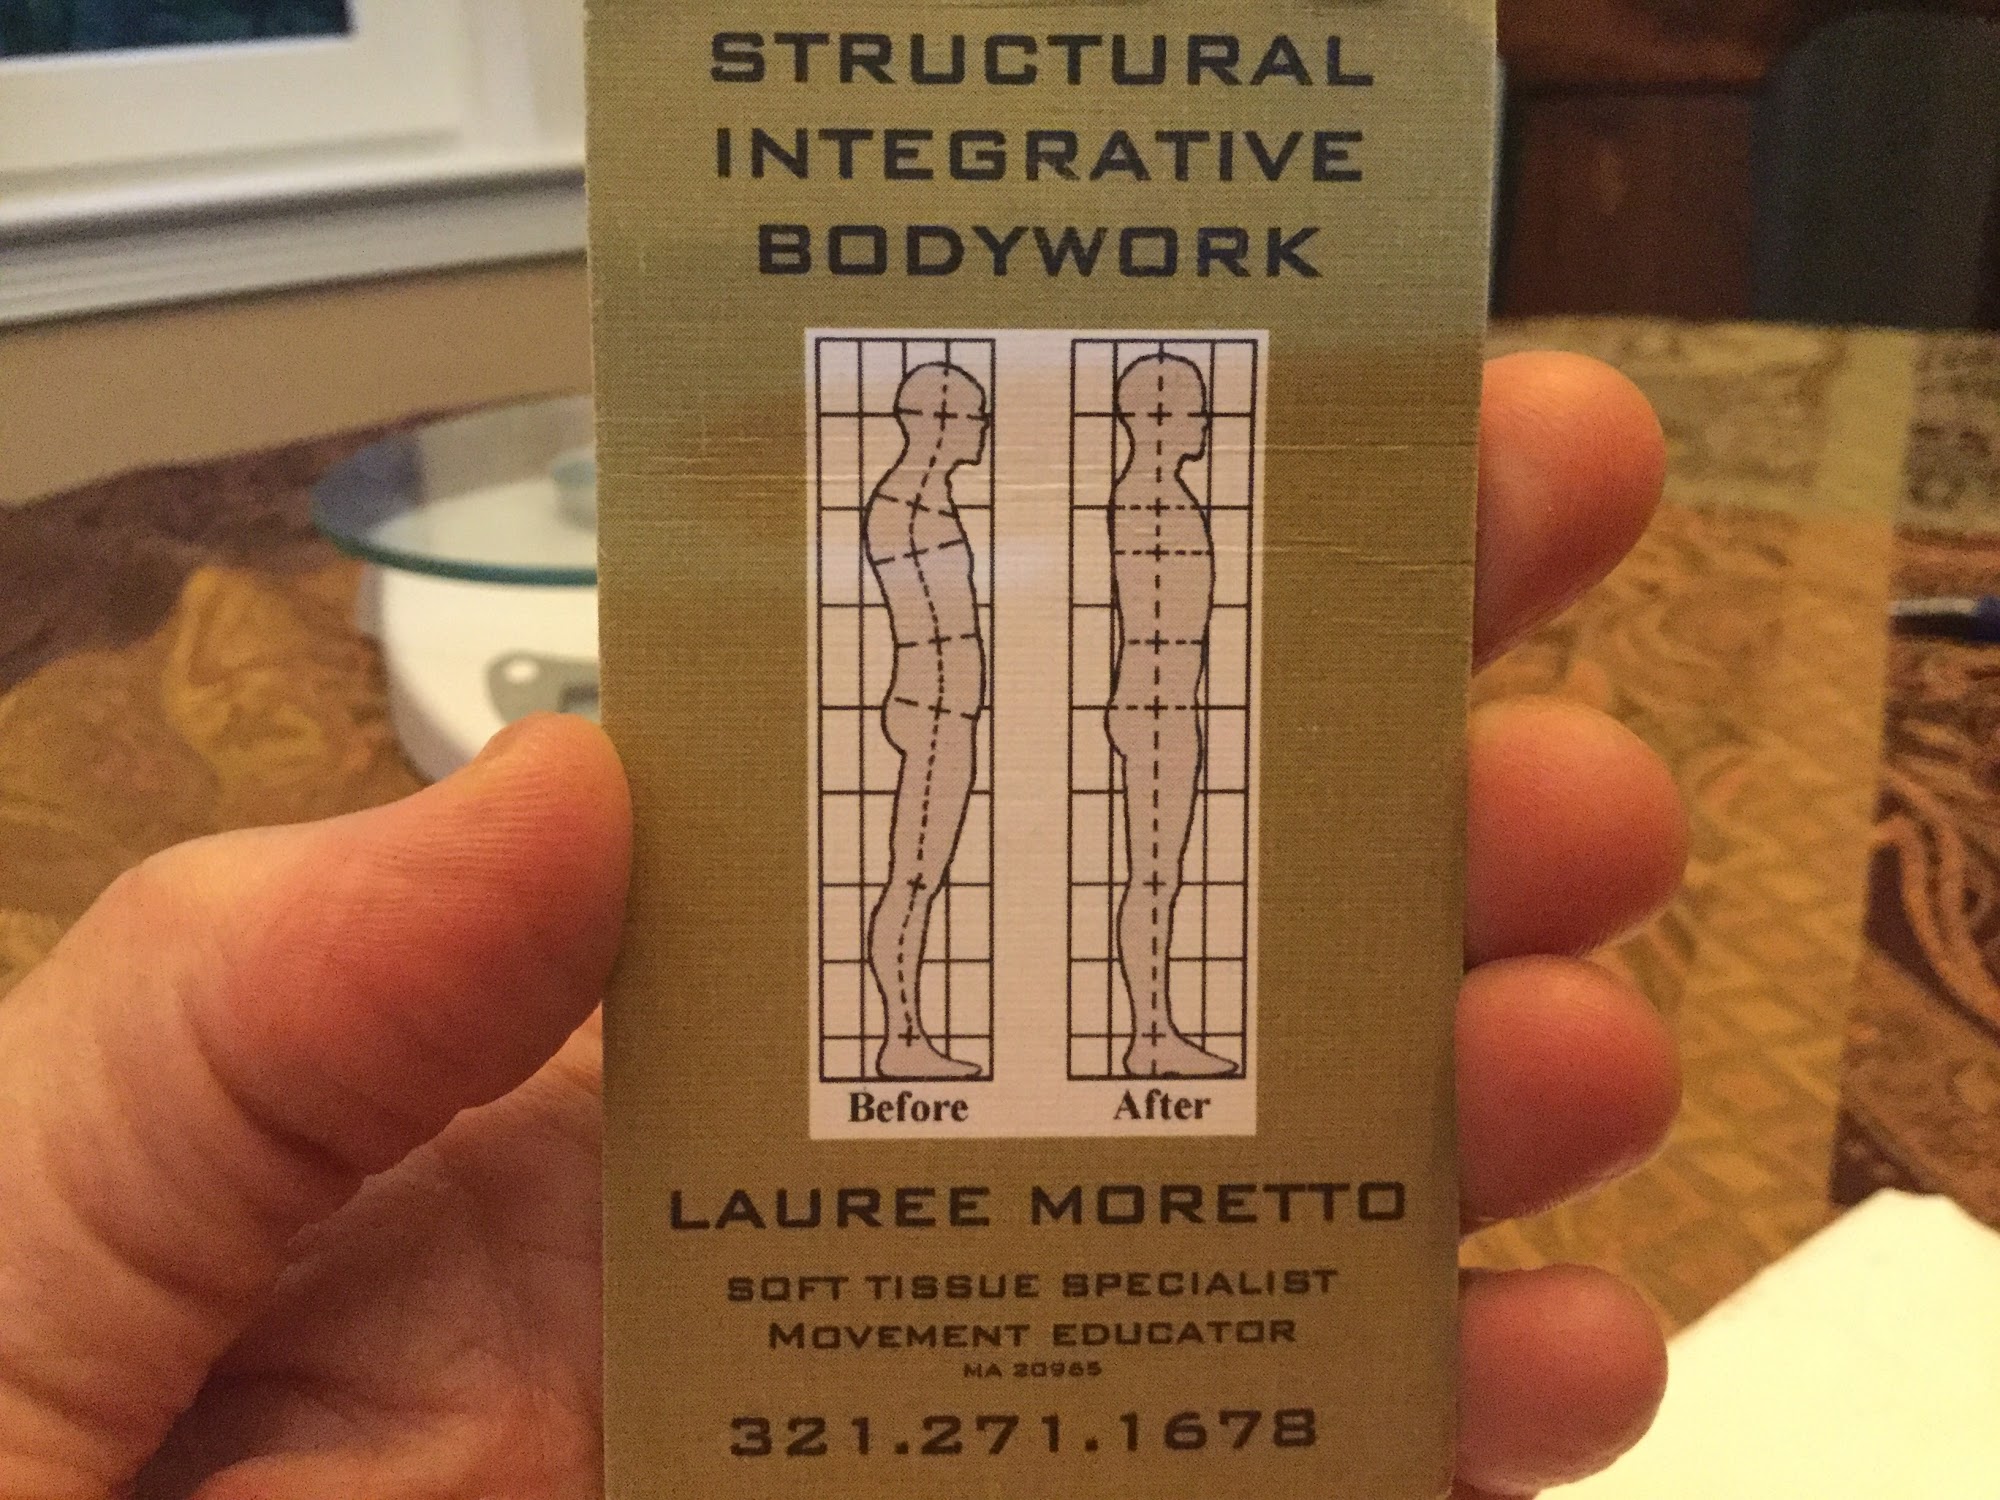 Structural Integrative Bodywork, commonly known as ROLFING